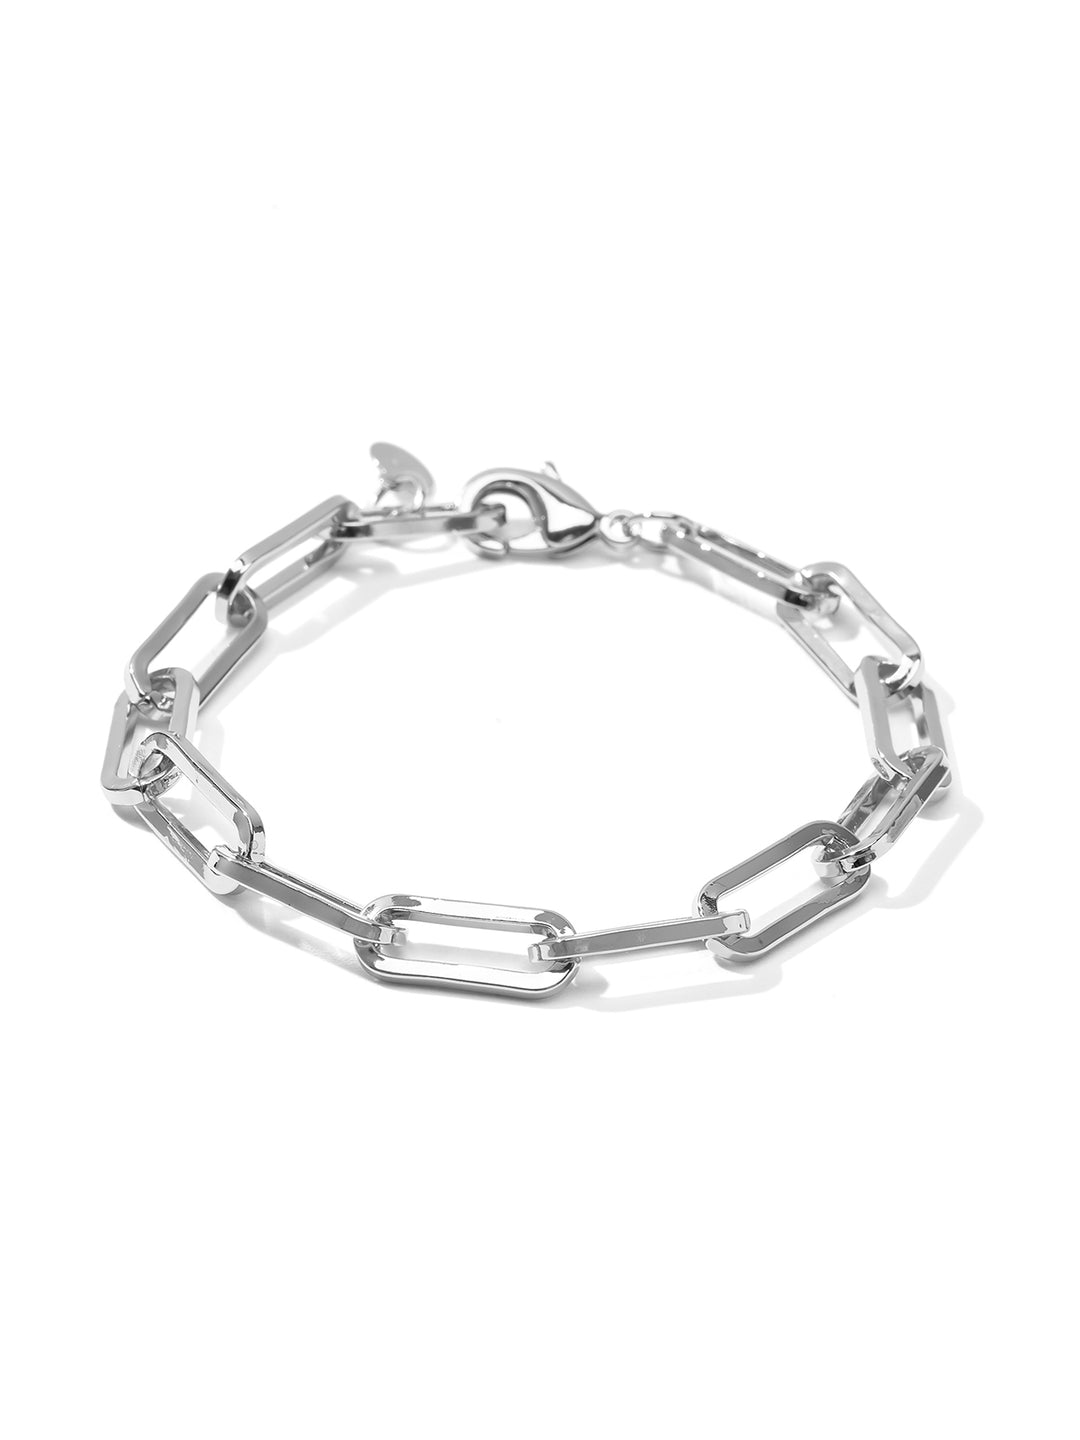 BICYCLE BRACELET • Color: White Gold